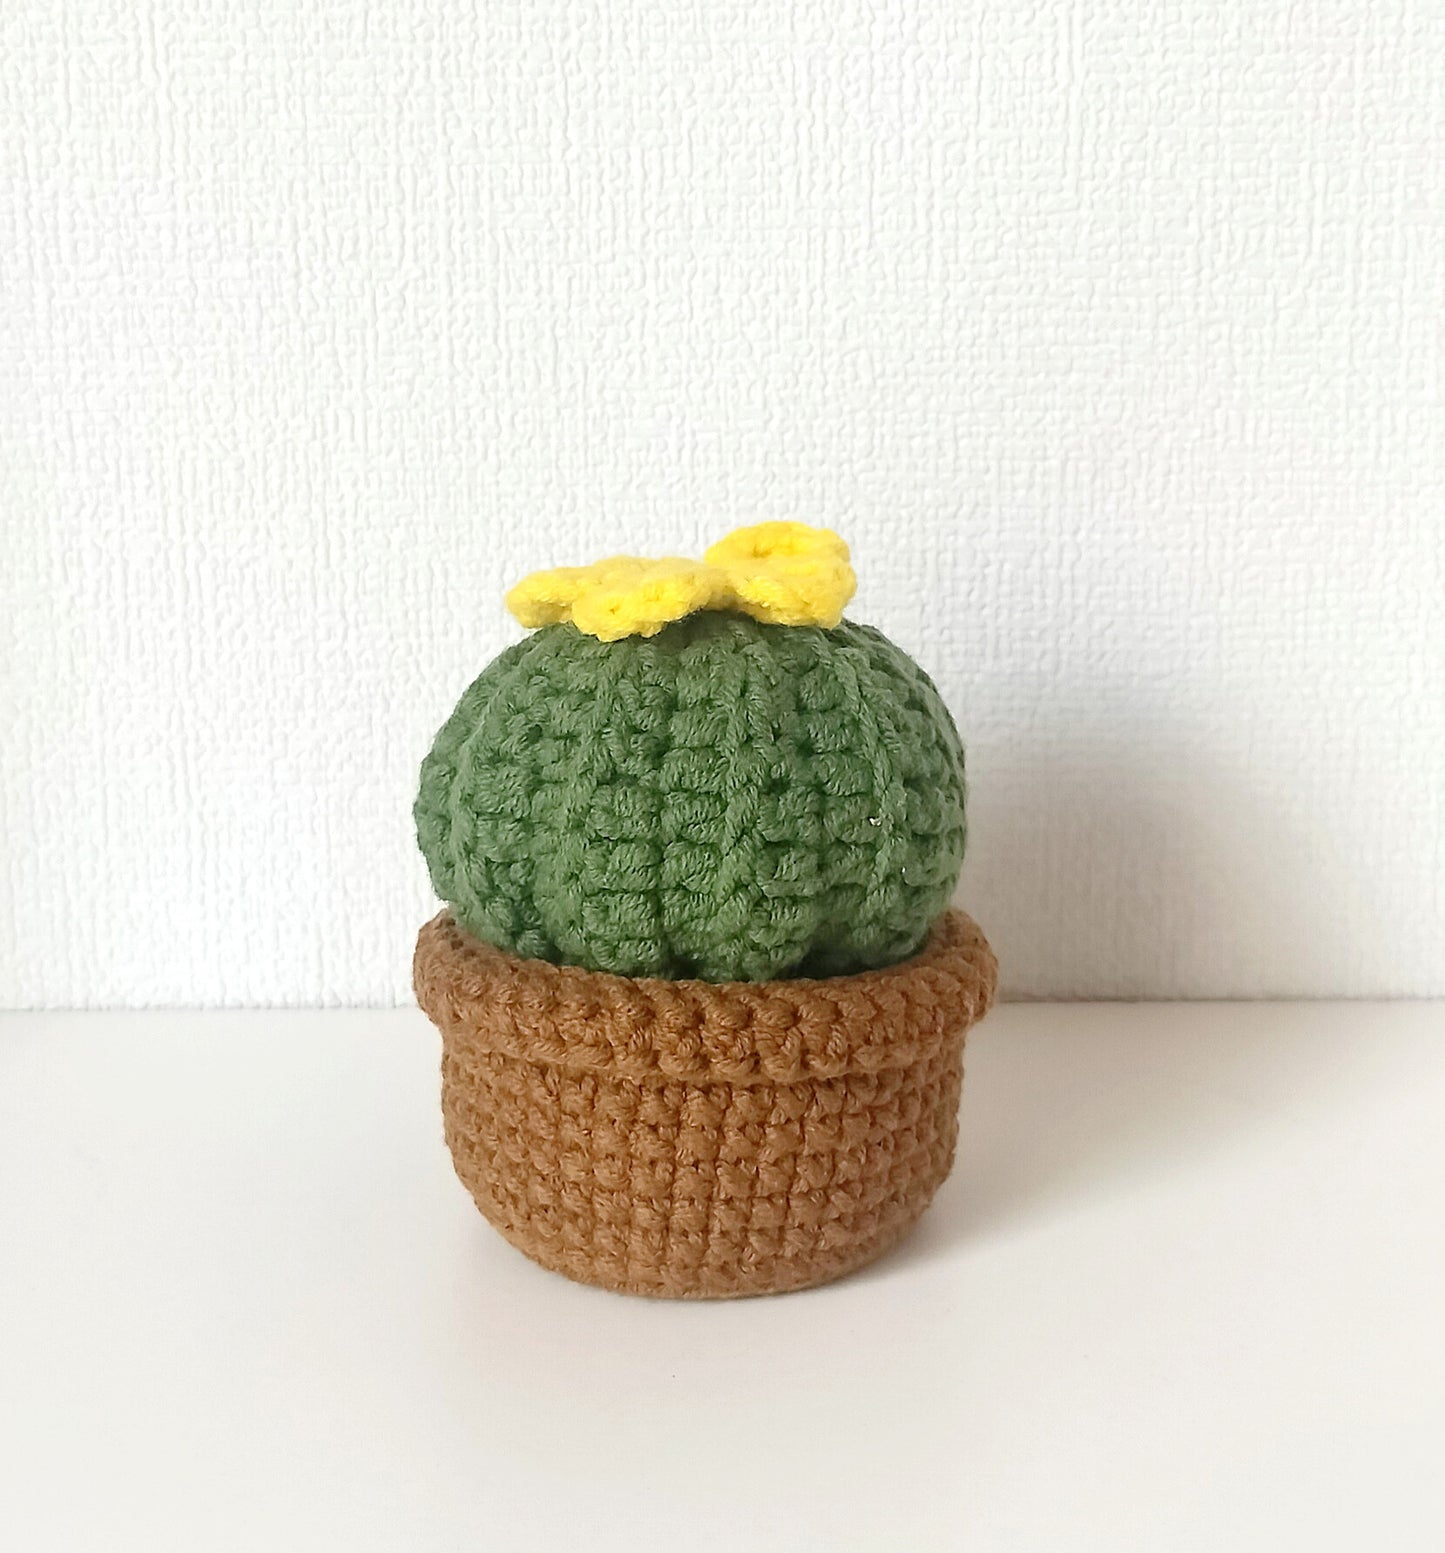 Artisan Crocheted Cactus Pots for Gift Giving